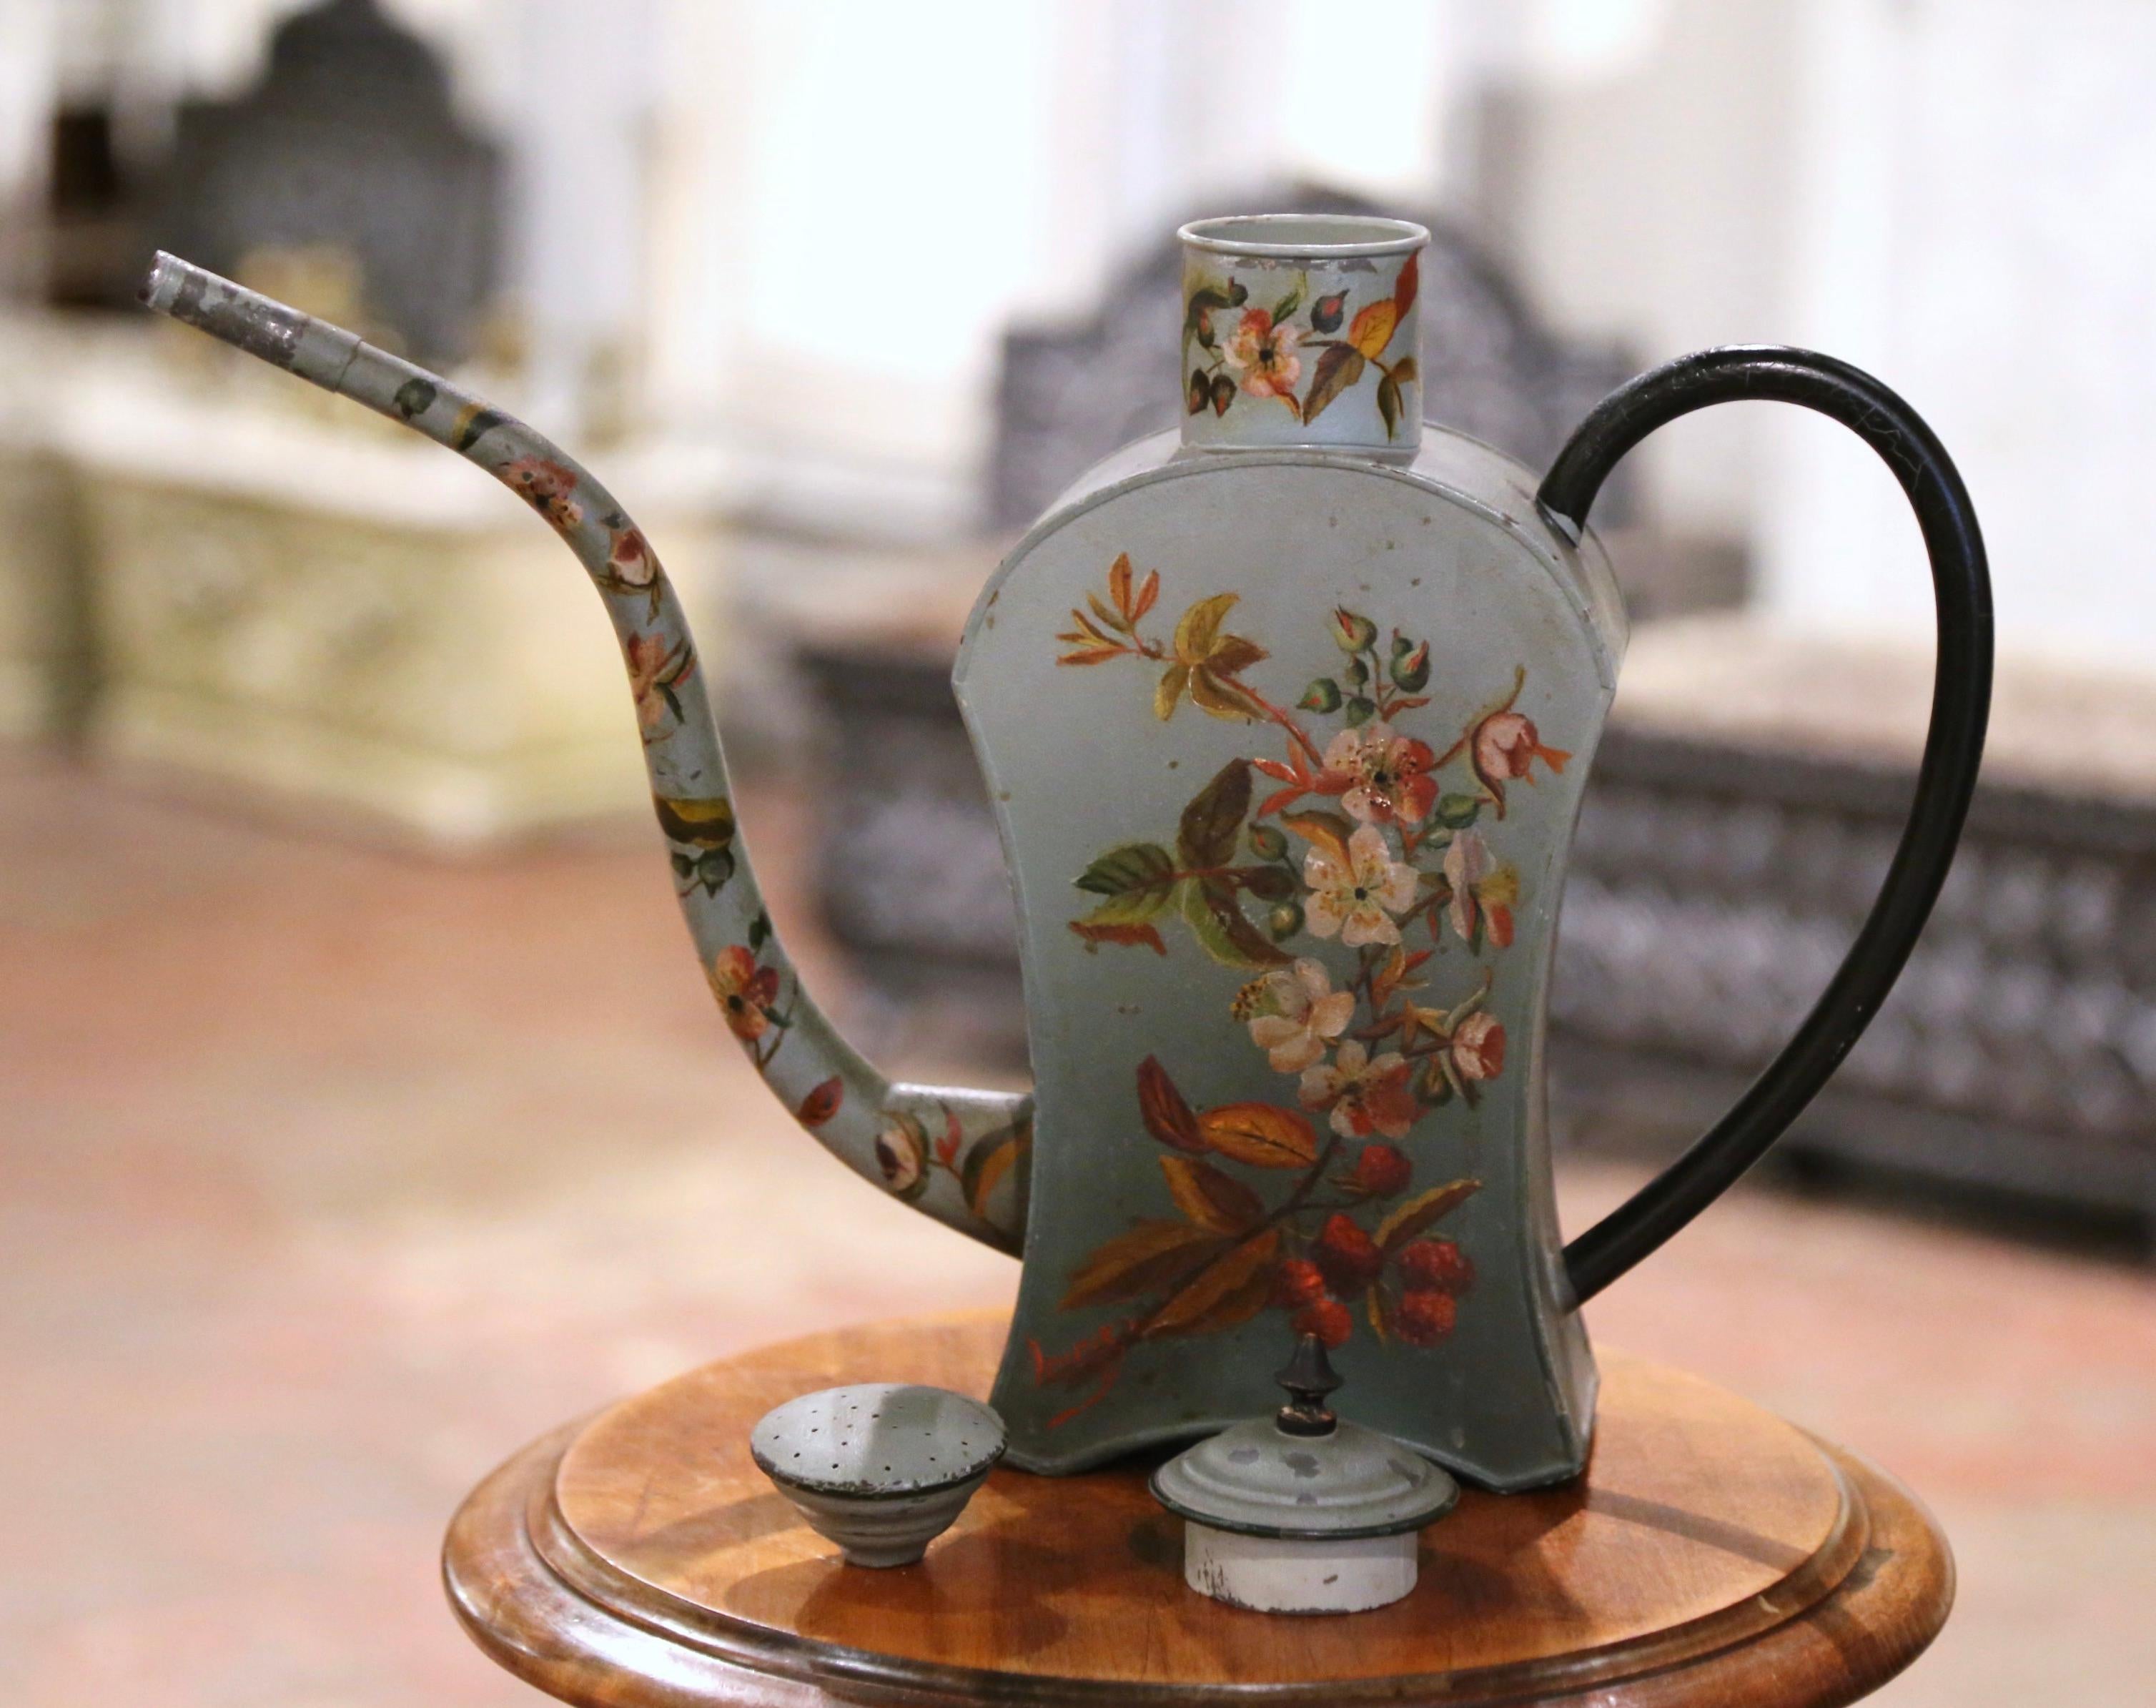 Decorate kitchen cabinets with this antique water can with its original removable lid! Hand crafted in France circa 1880, and built of metal, the tole construction gives this watering can a charming and unique character. Adorned with hand-painted